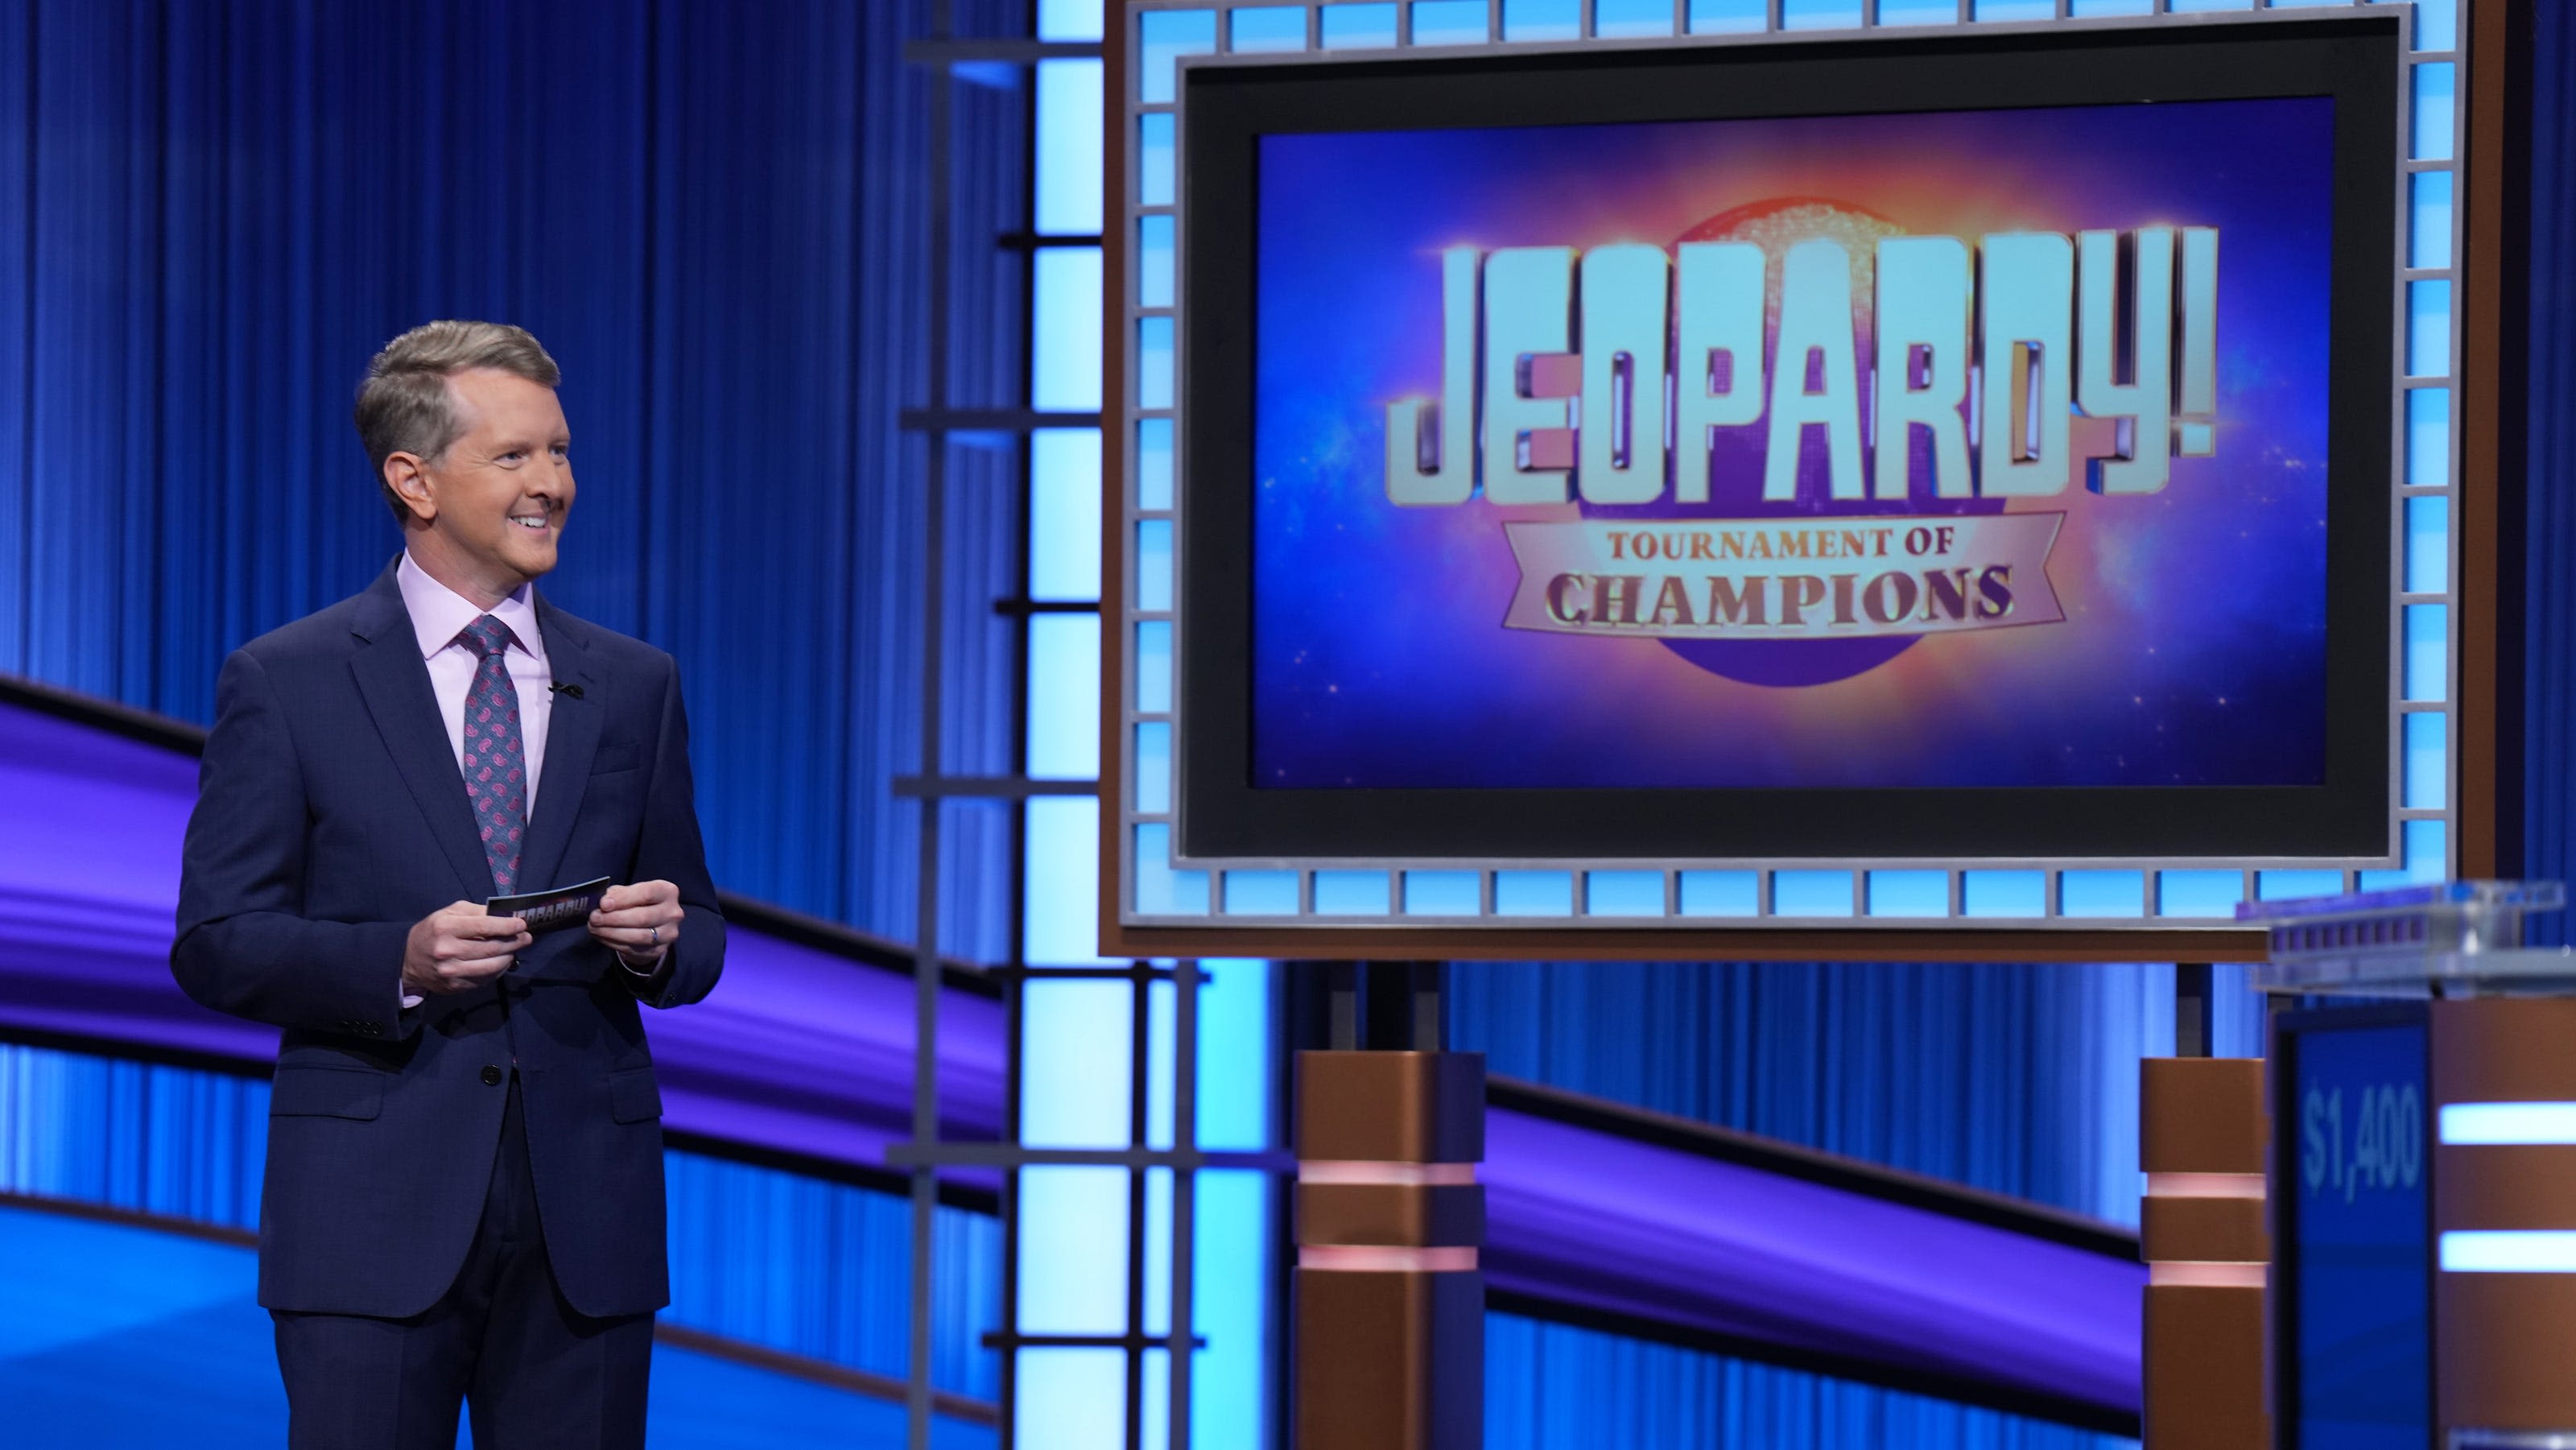 Purdue archivist back on 'Jeopardy!' stage after winning her first game. How to watch